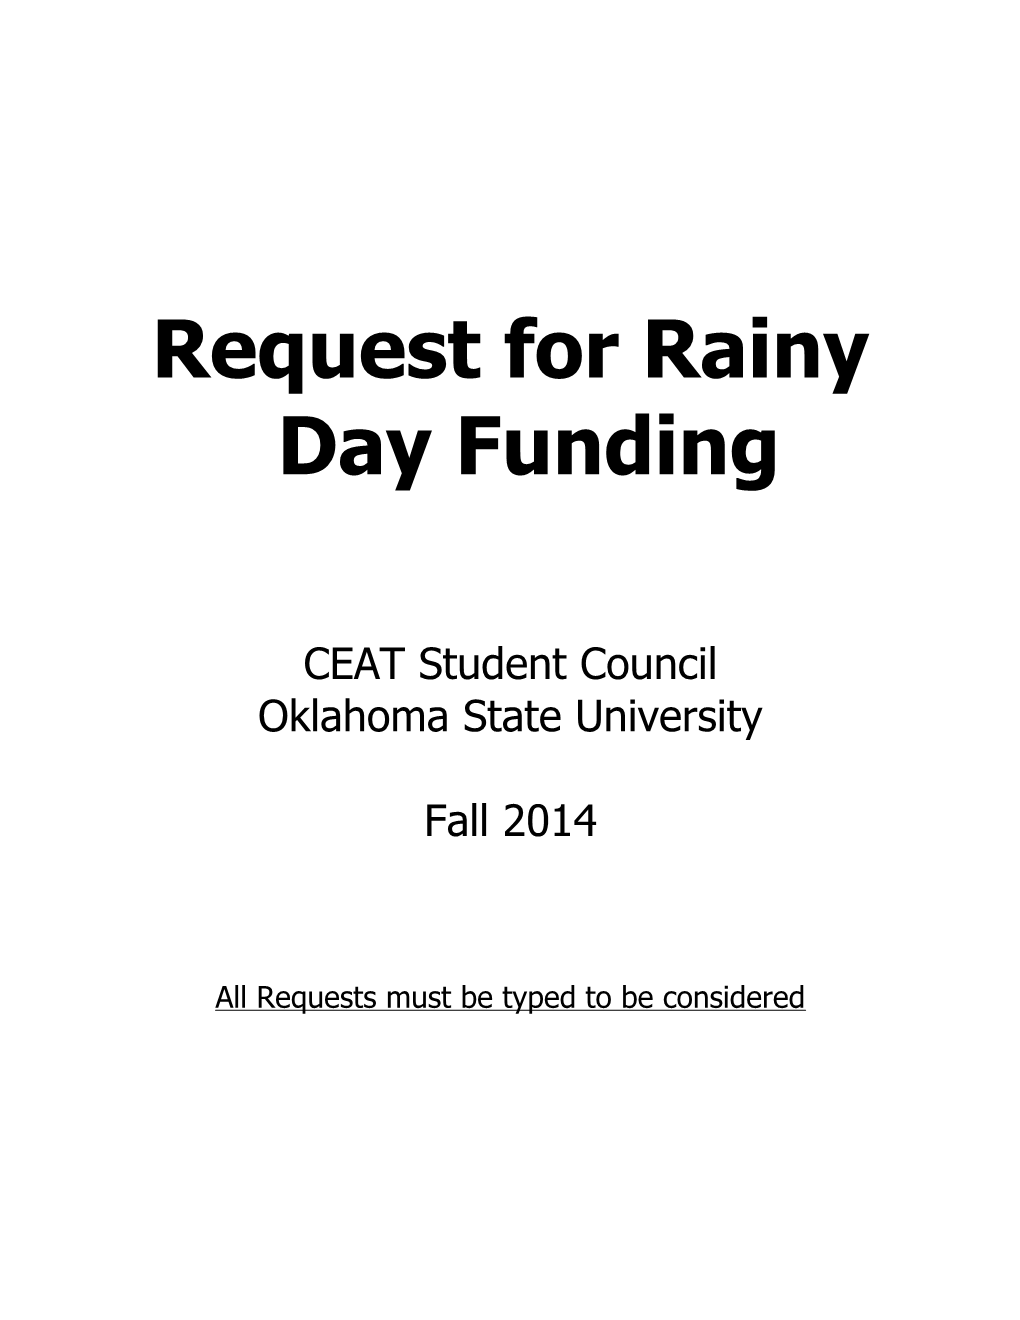 CEAT Student Council Rainy Day Fund Application